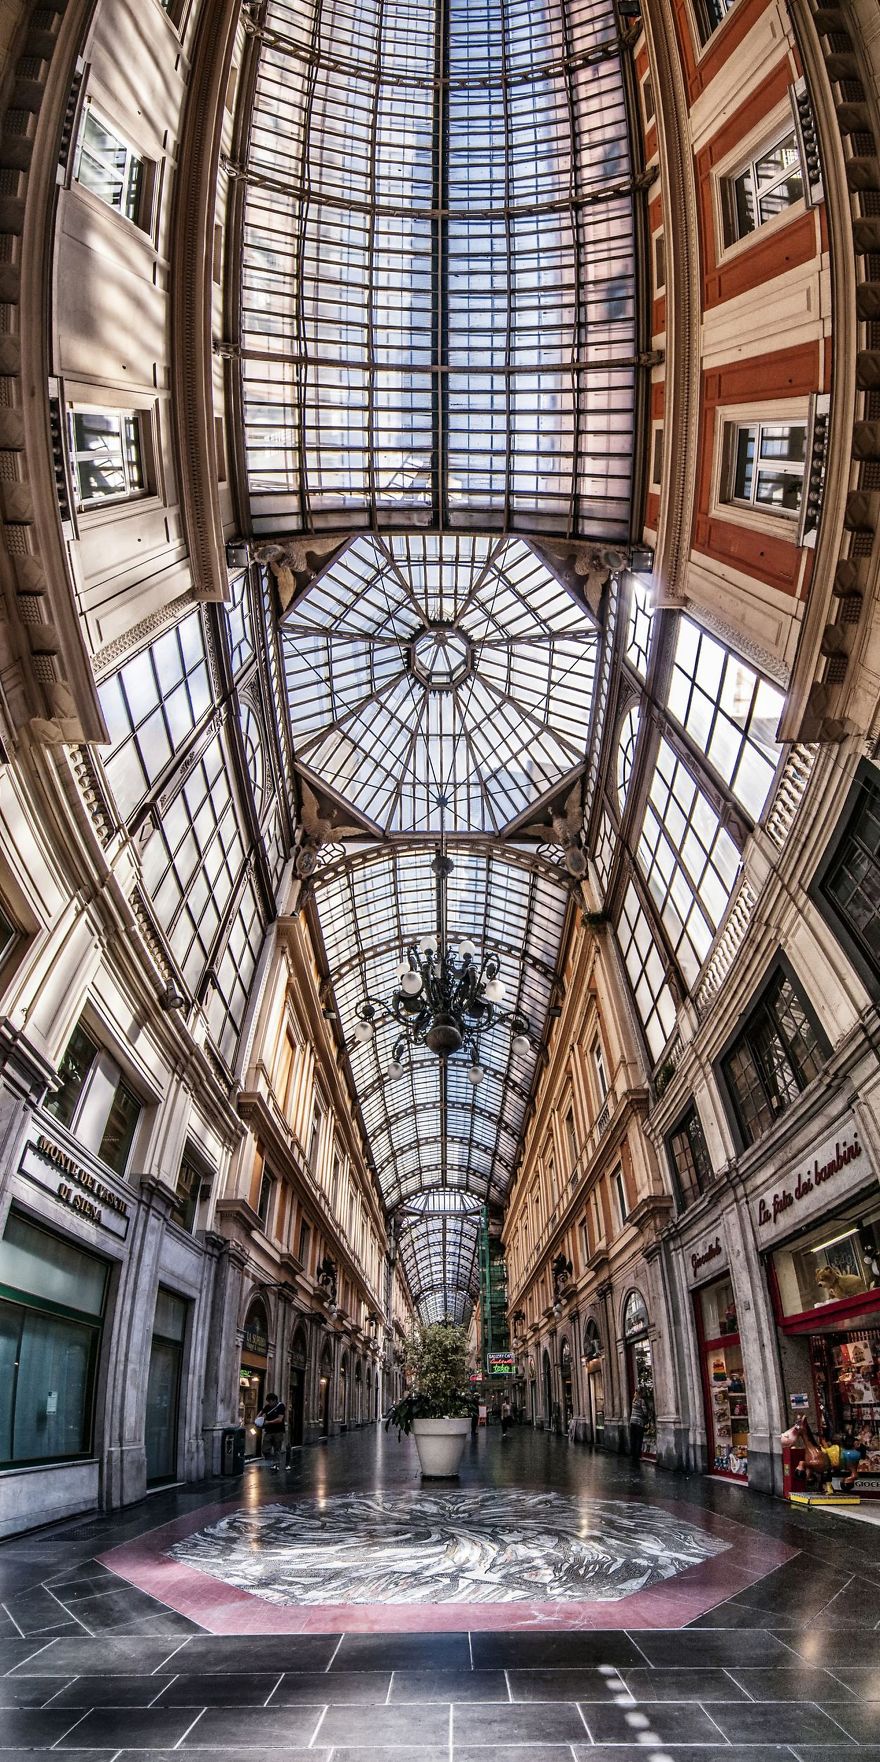 I Shoot Vertical Panorama To Search The Real Form Of Beautiful Architecture